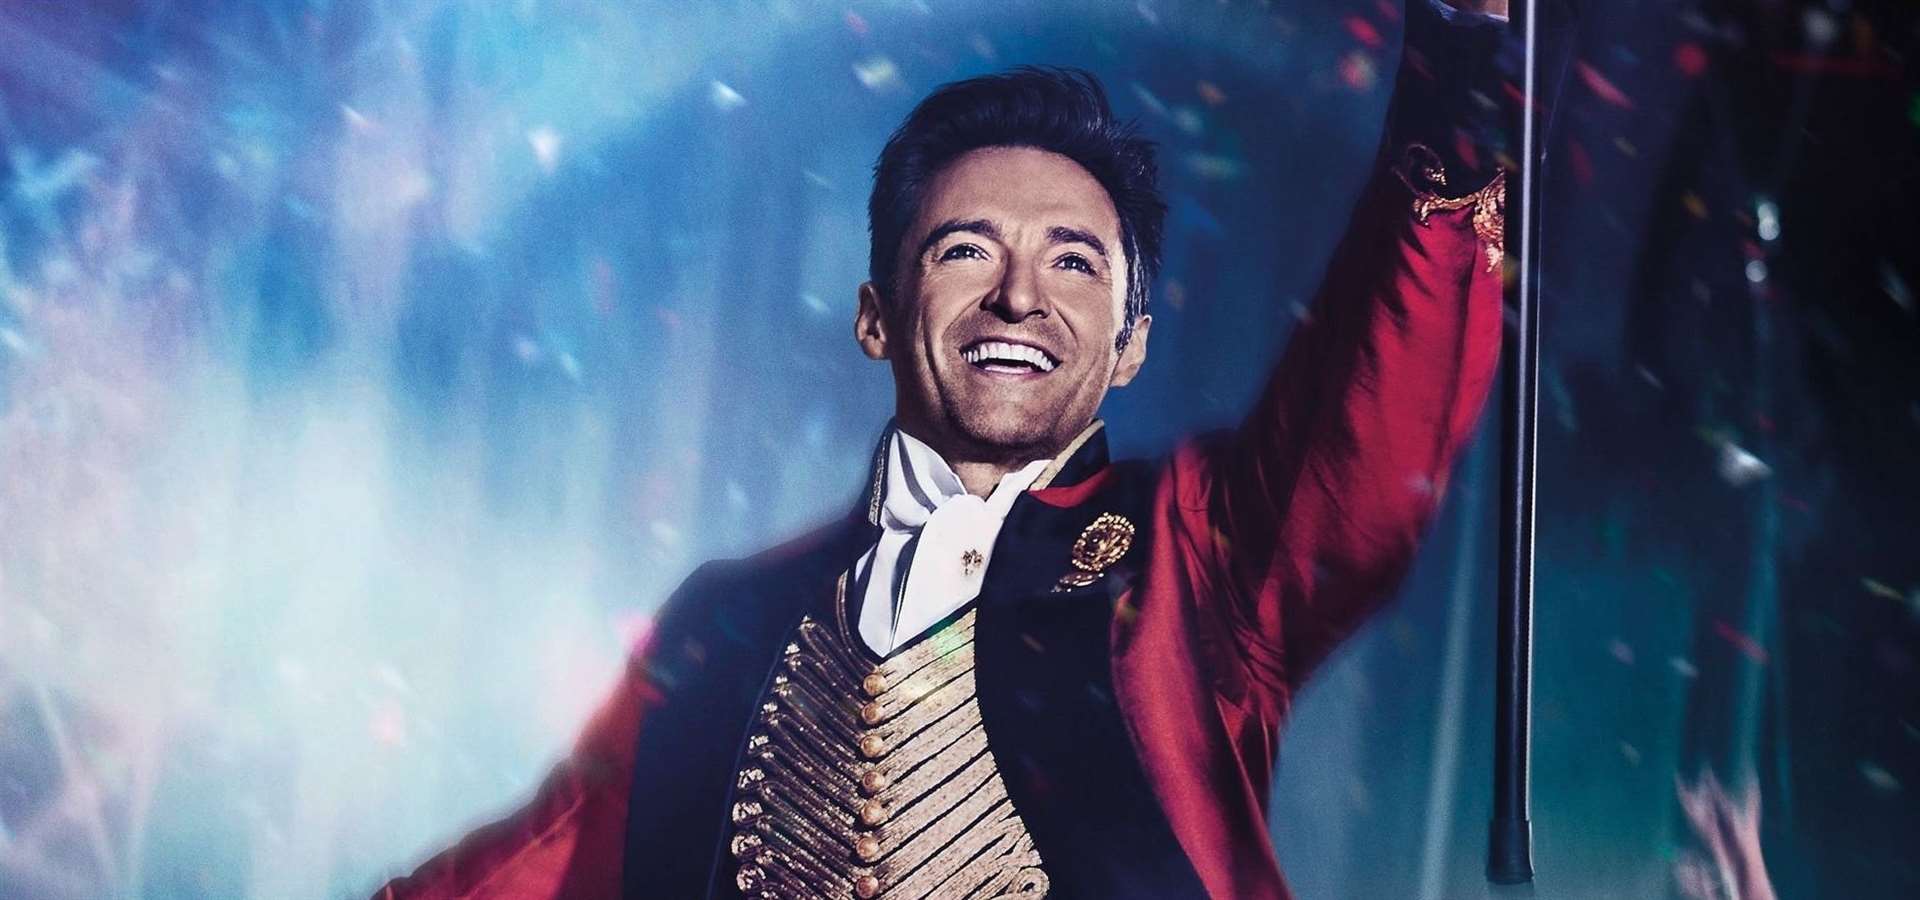 The Greatest Showman is among the Luna Cinema screenings this summer